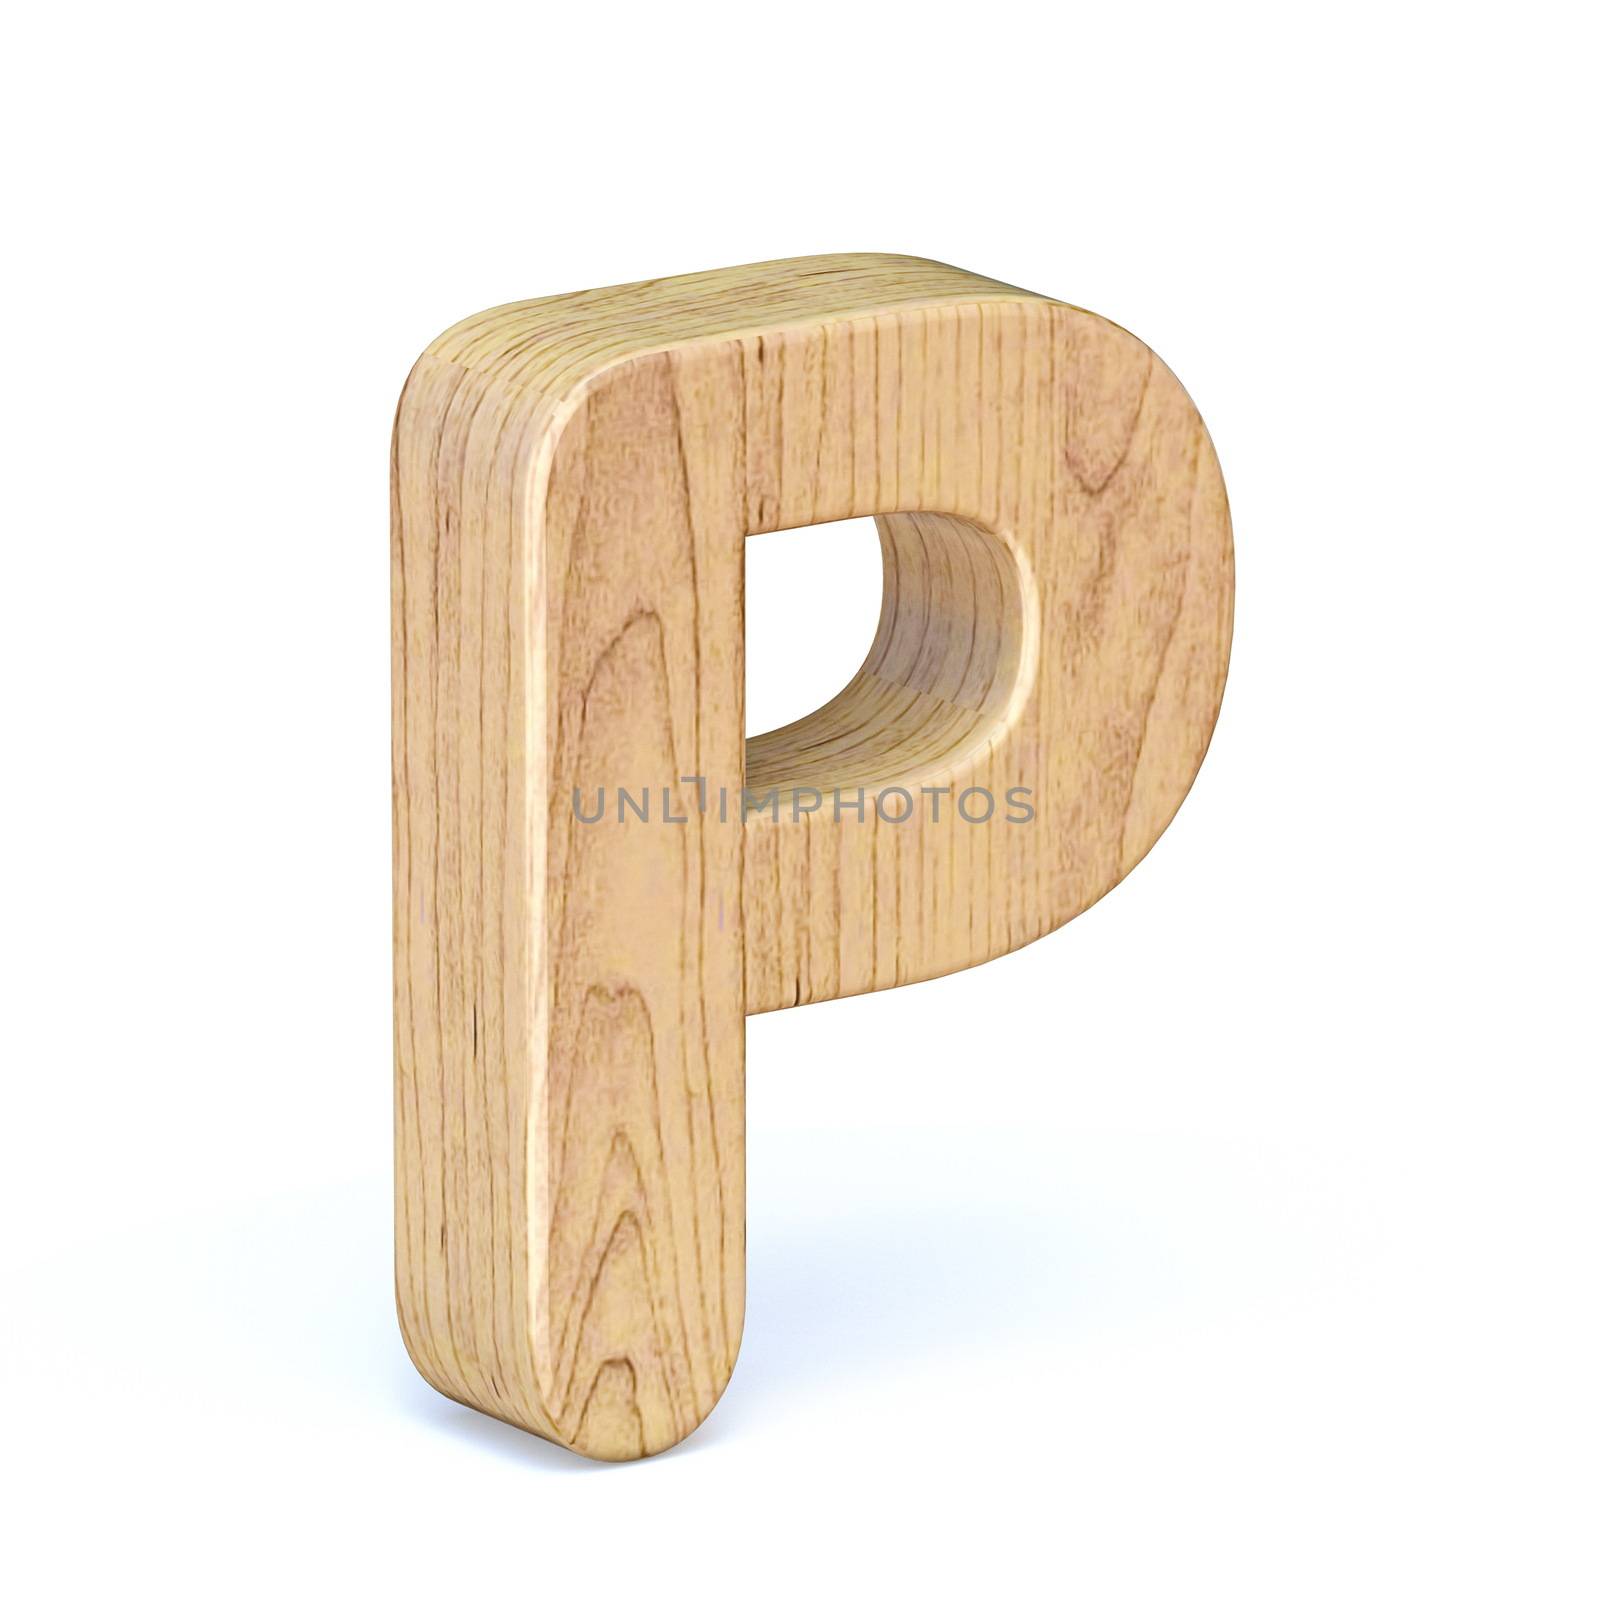 Rounded wooden font Letter P 3D by djmilic